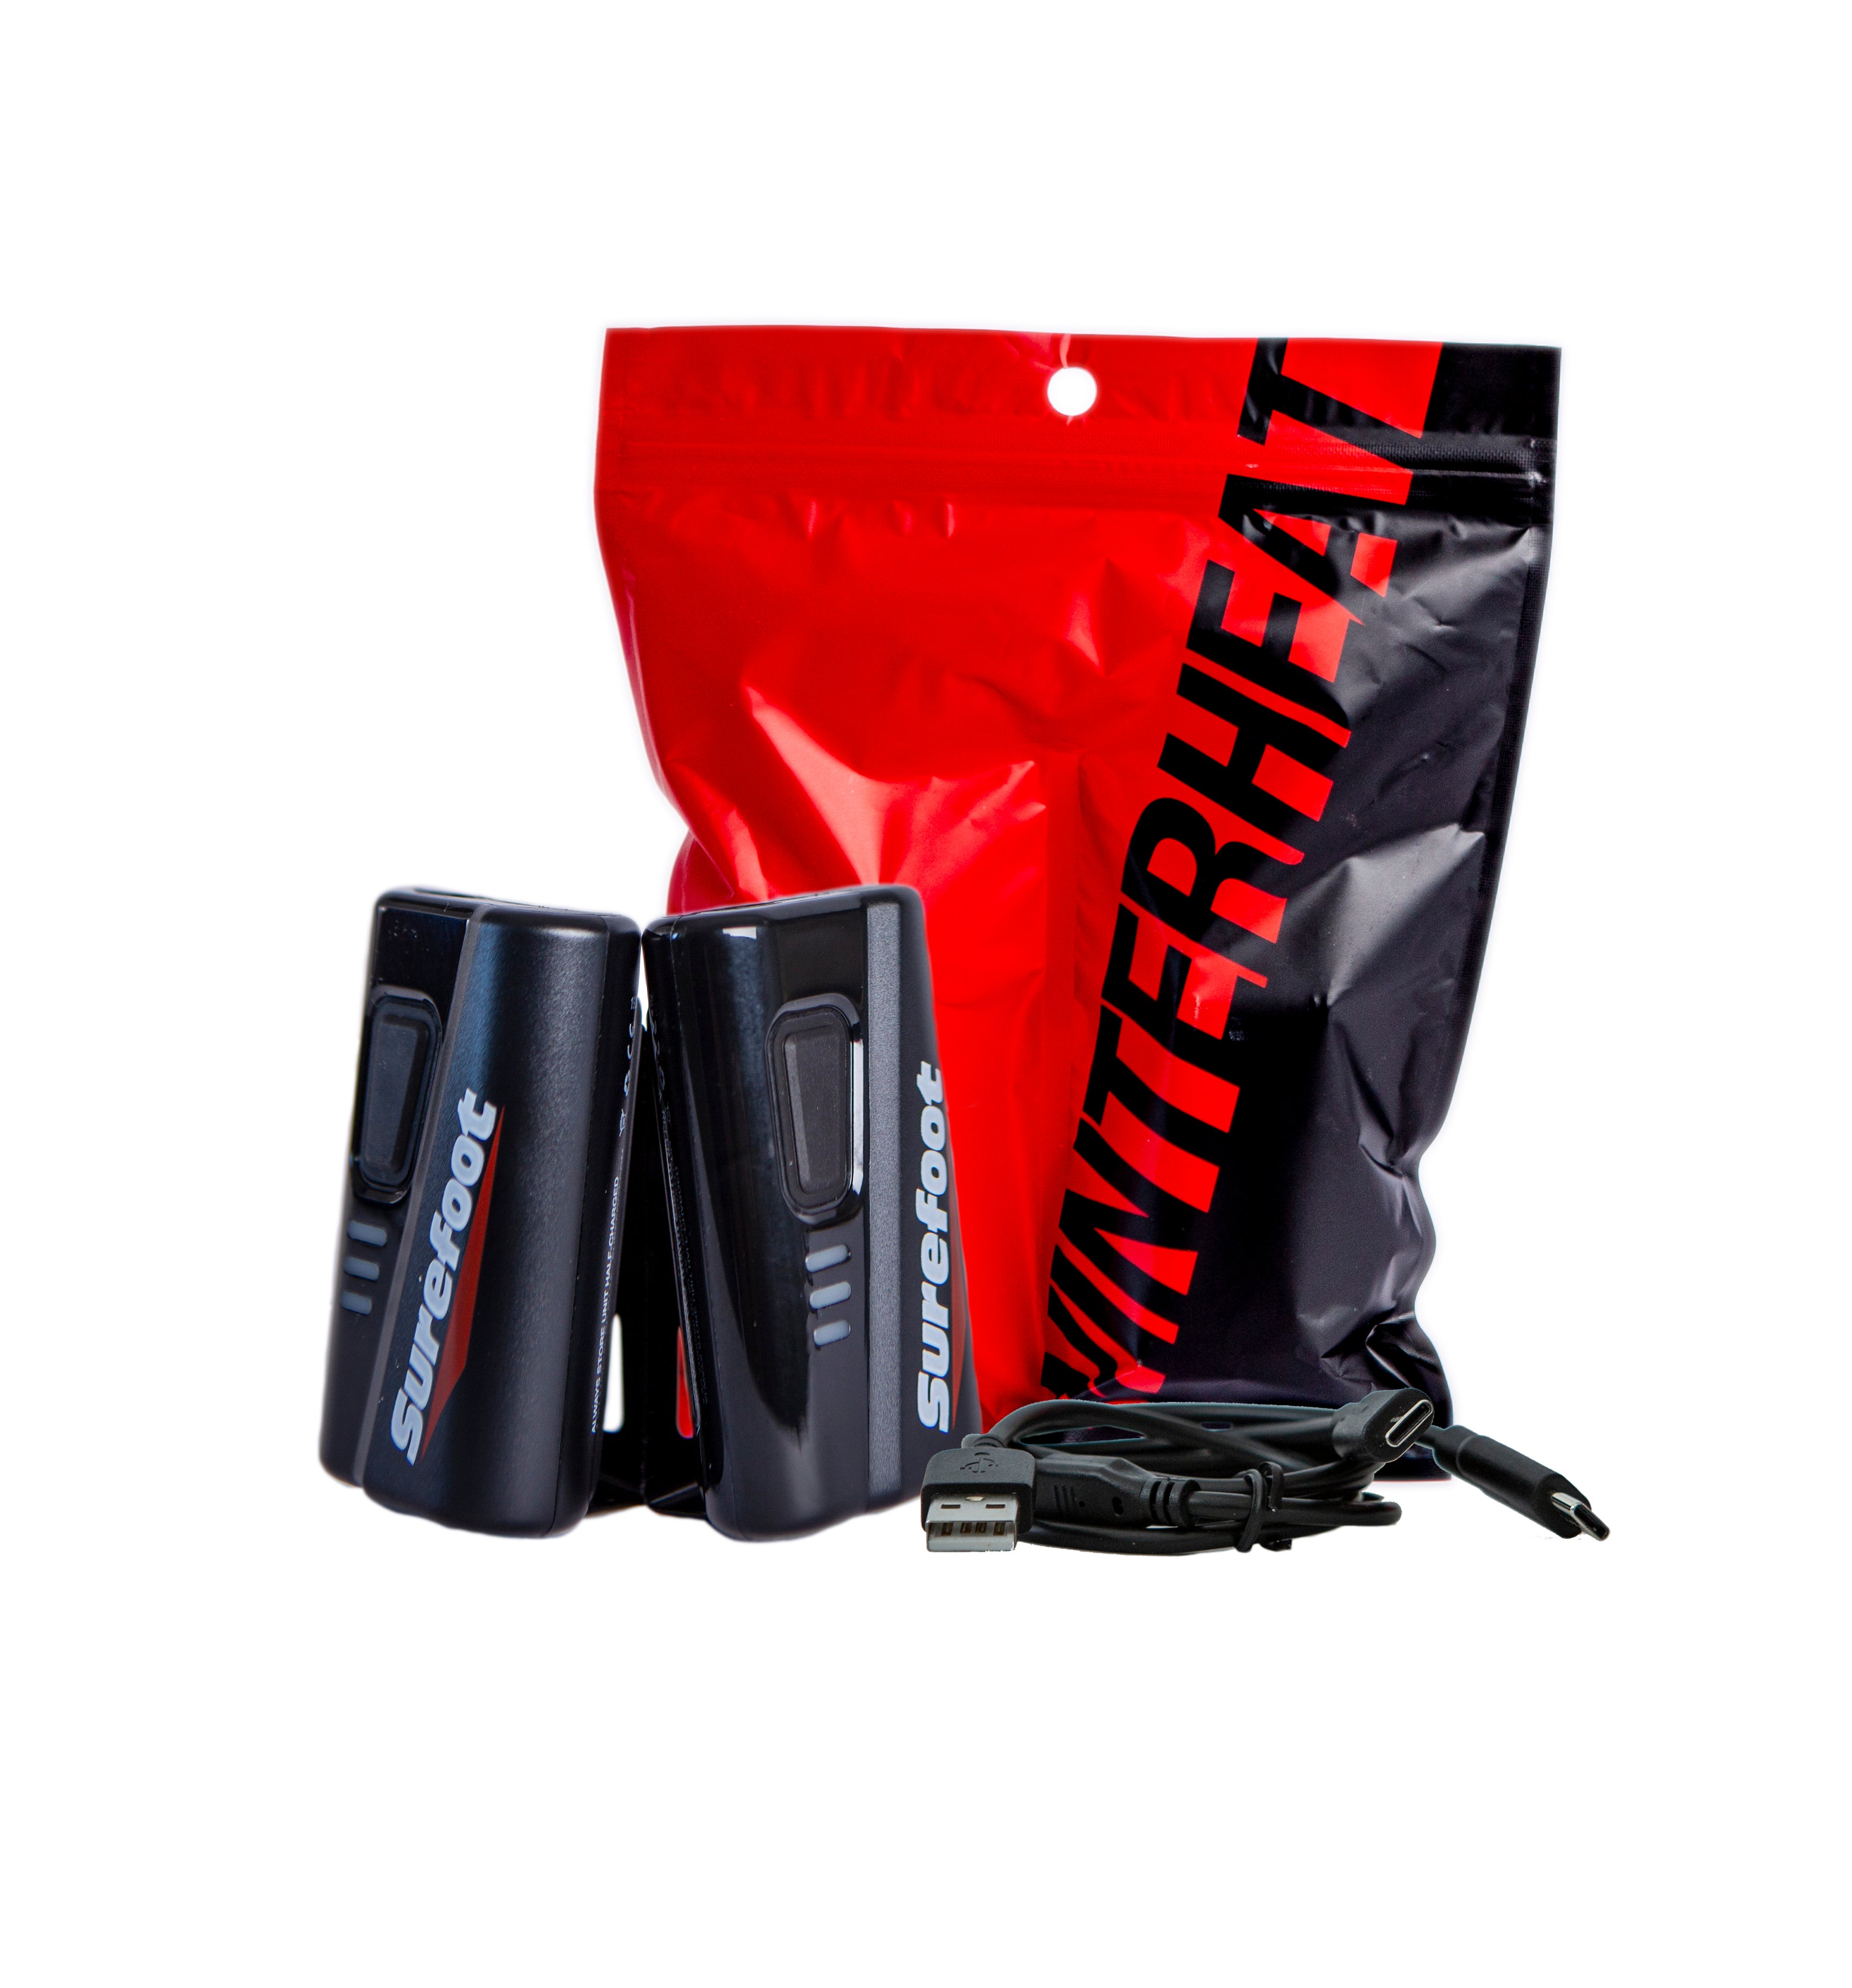 Surefoot Winterheat red and black packaging behind two small Surefoot Winterheat battery packs and USB-C charging cable laying next to them,